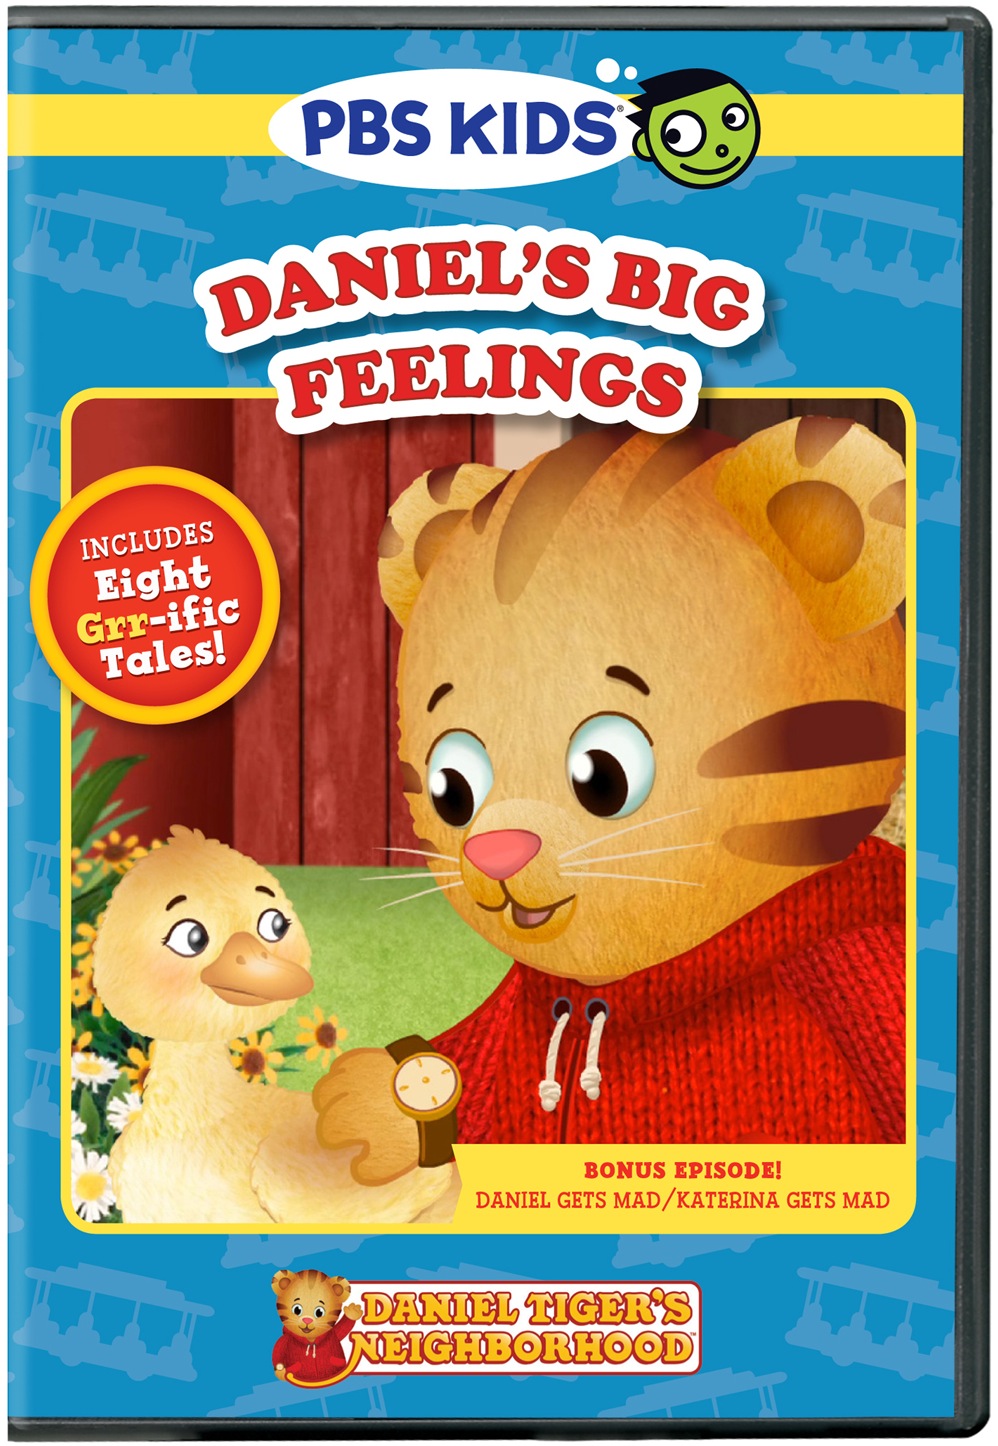 Daniel Tigers Neighborhood On Dvd For The First Time • The Naptime